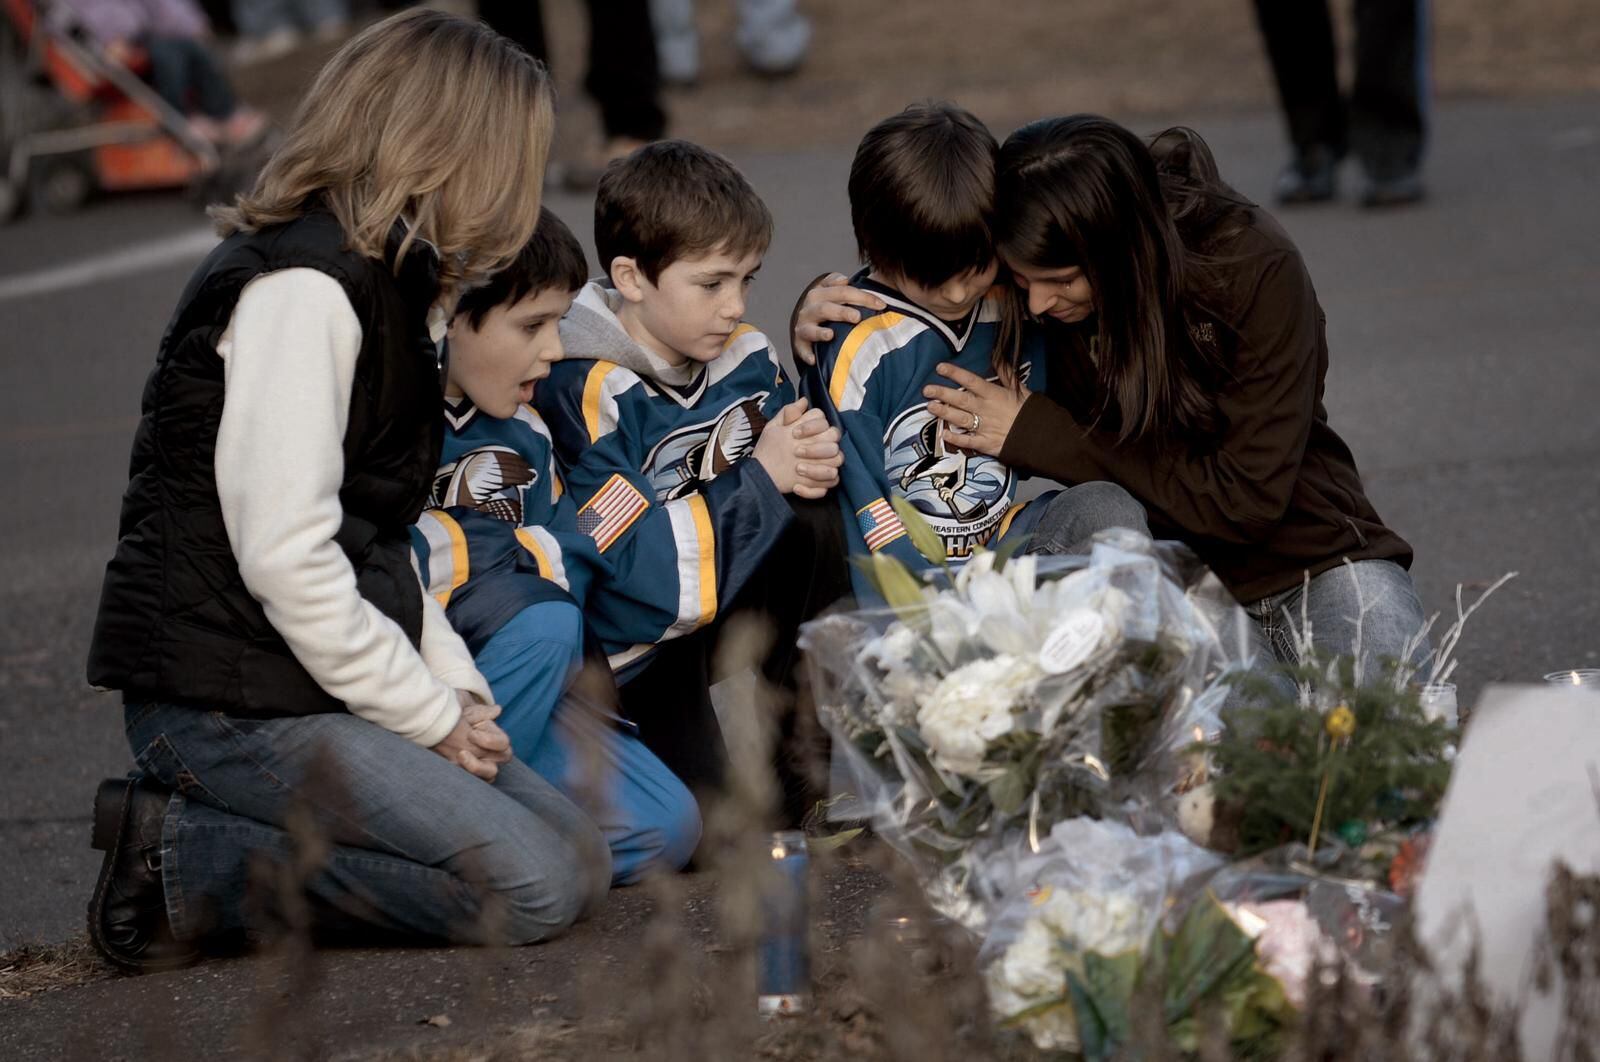 The Sandy Hook Elementary School shooting left 28 dead, including the shooter, of whom 20 were children. 